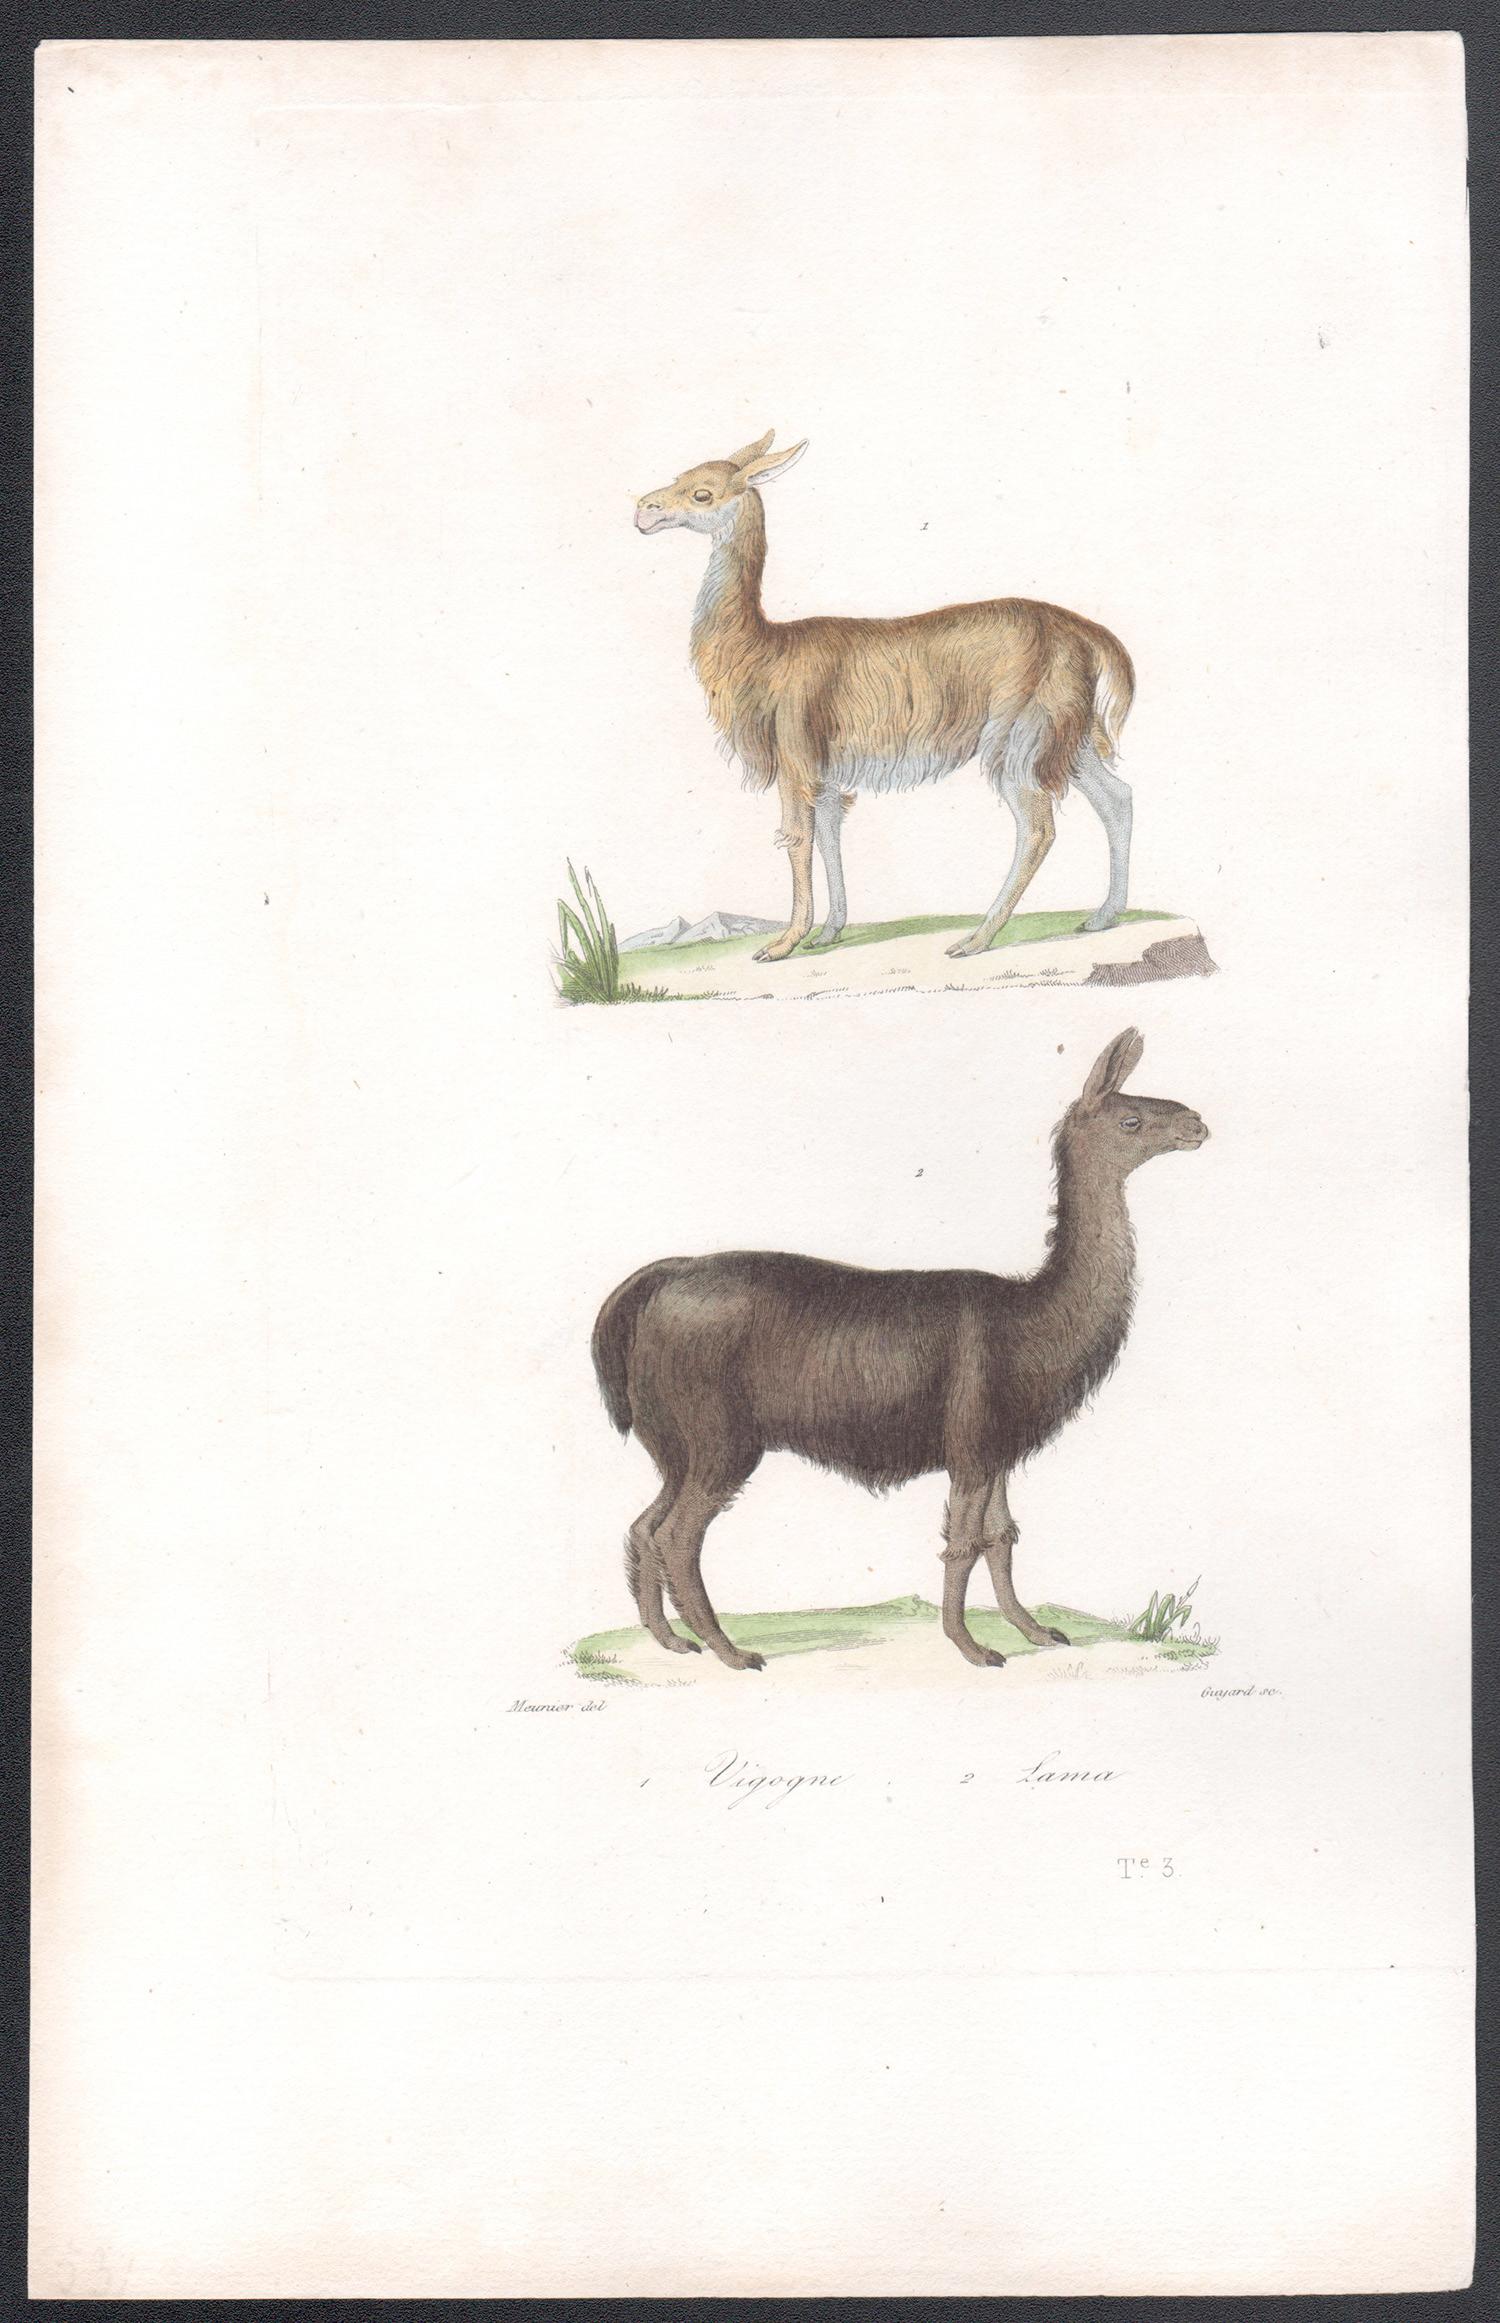 Vicuna and Llama, mid 19th French century animal engraving - Print by Unknown